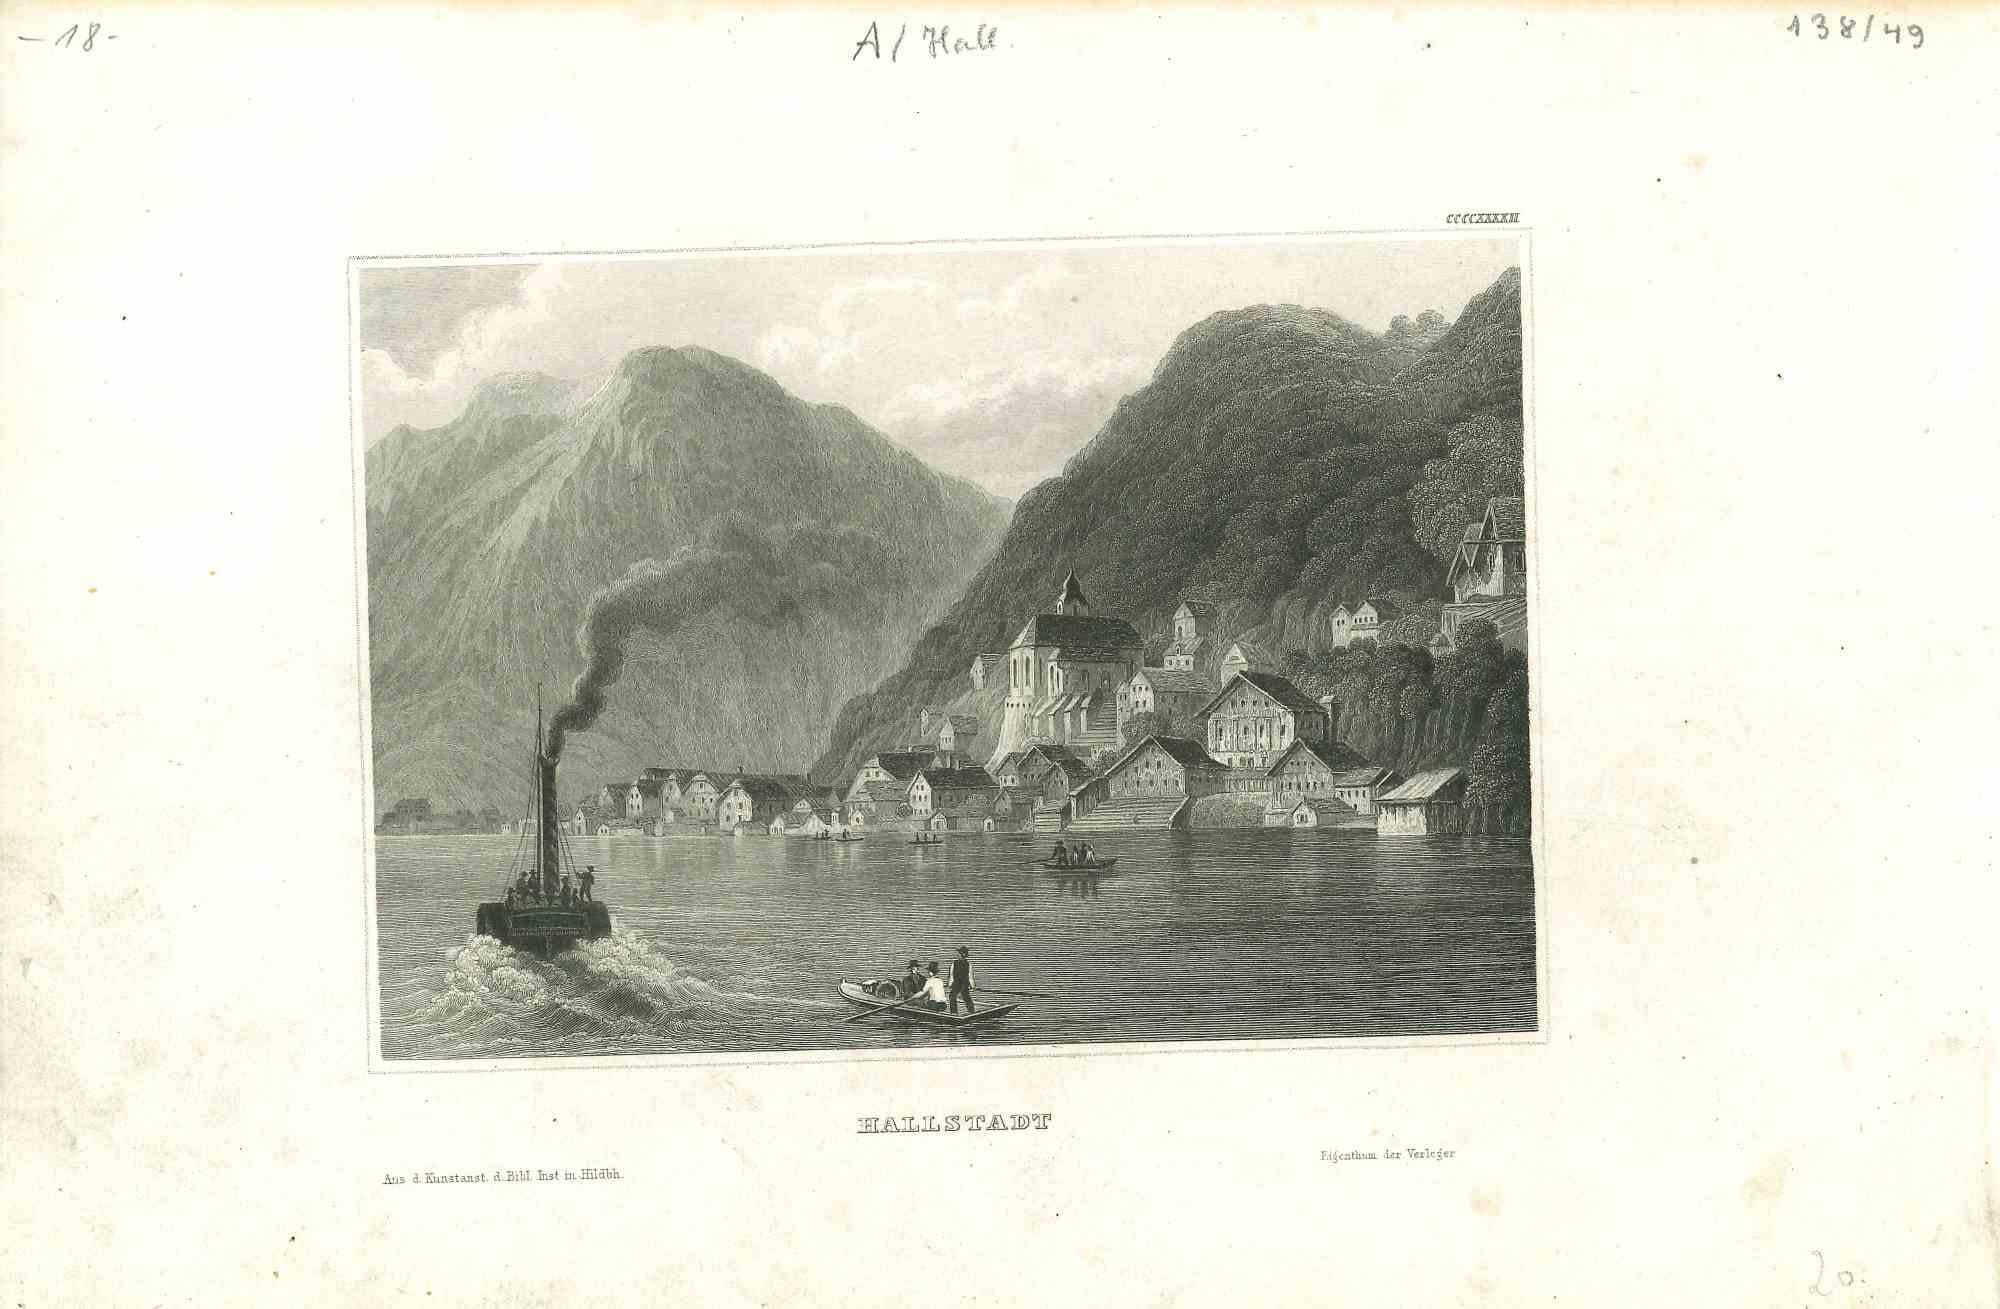 Unknown Landscape Print - Ancient View of Hallstadt - Original Lithograph on Paper - Mid-19th Century